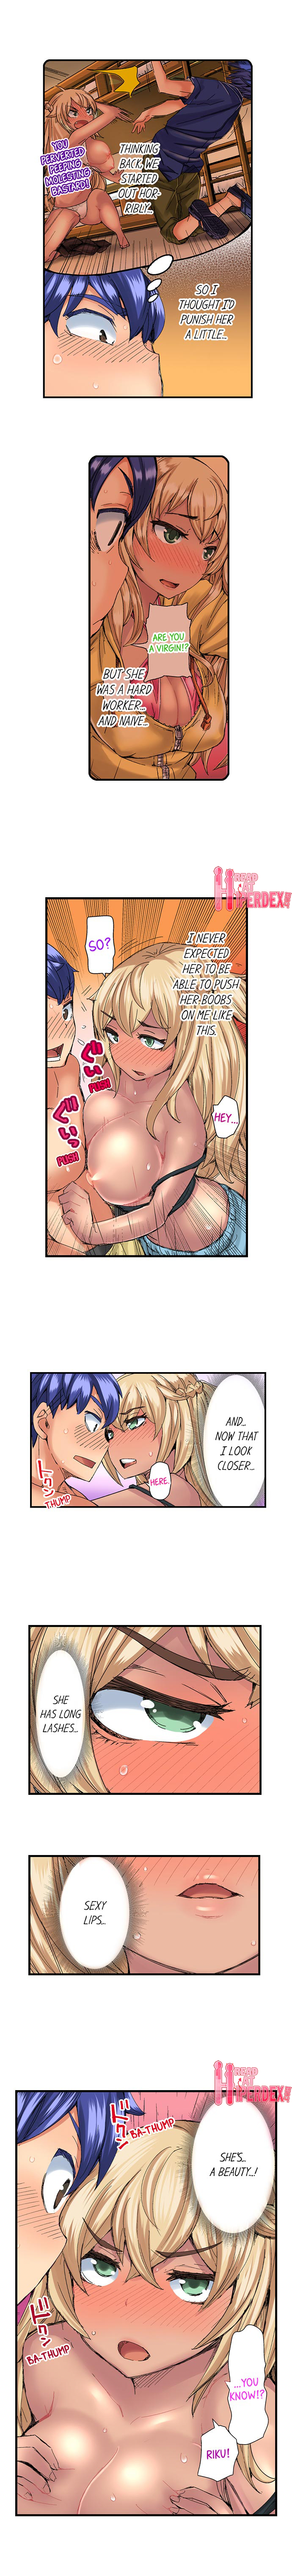 Taking a Hot Tanned Chick’s Virginity - Chapter 34 Page 4